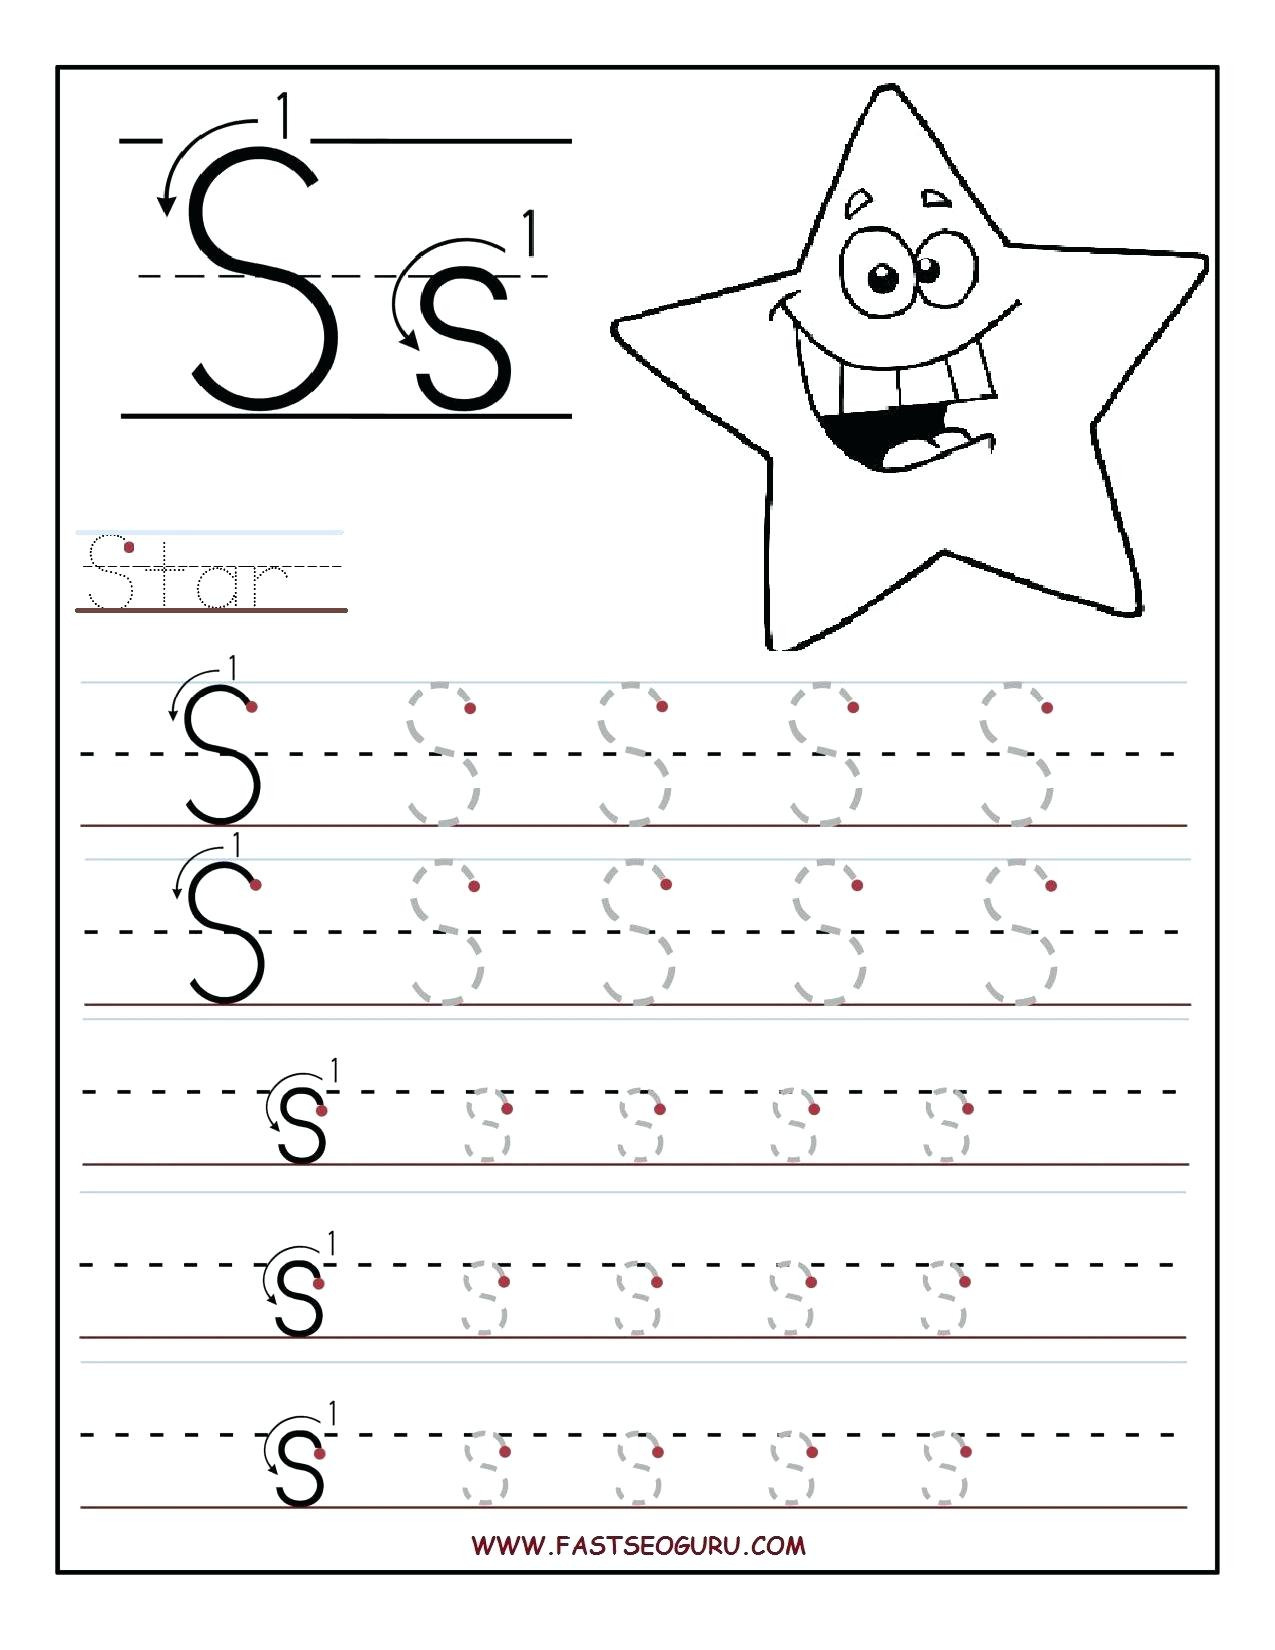 tracing-worksheets-for-3-year-olds-db-excel